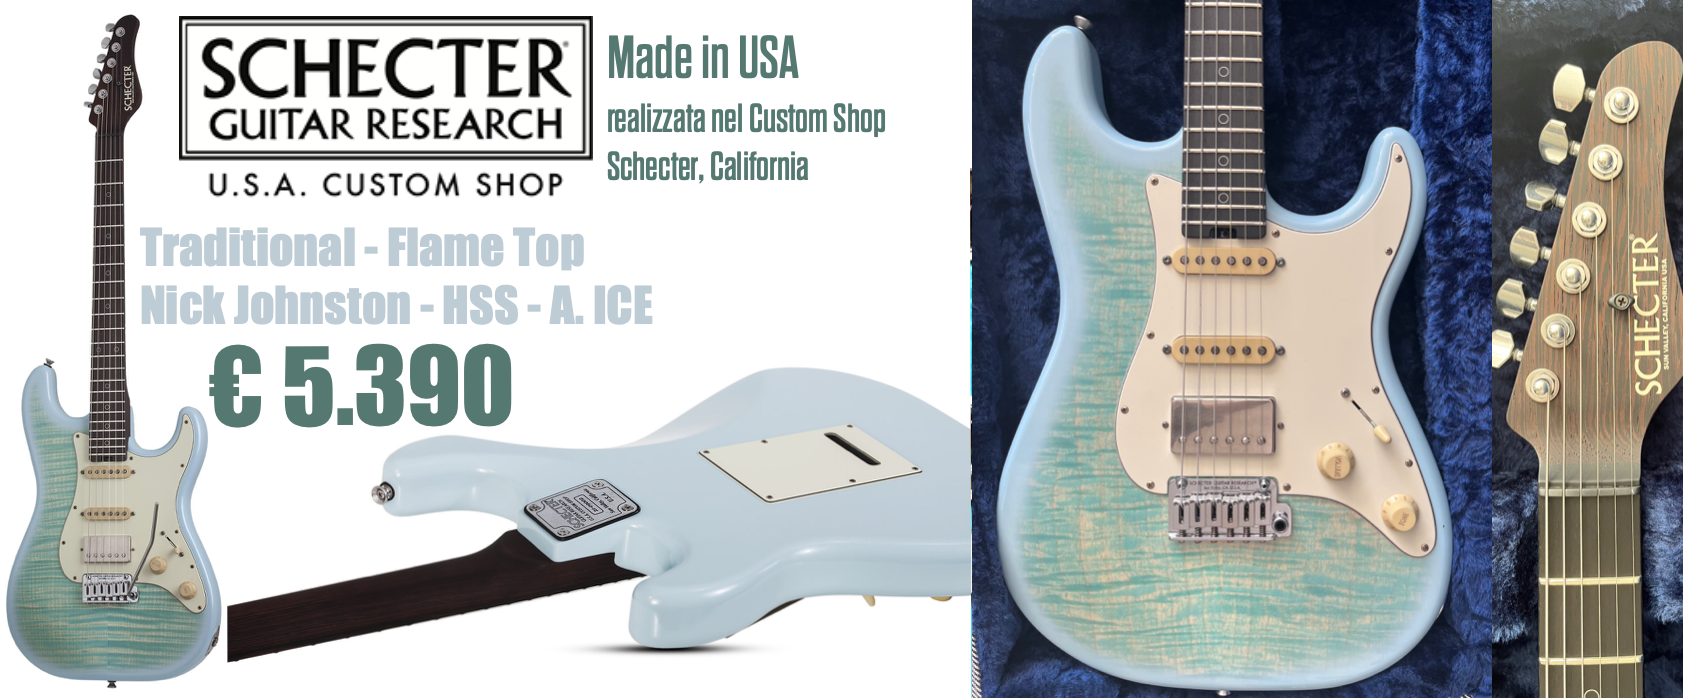 Schecter-mad-in-usa